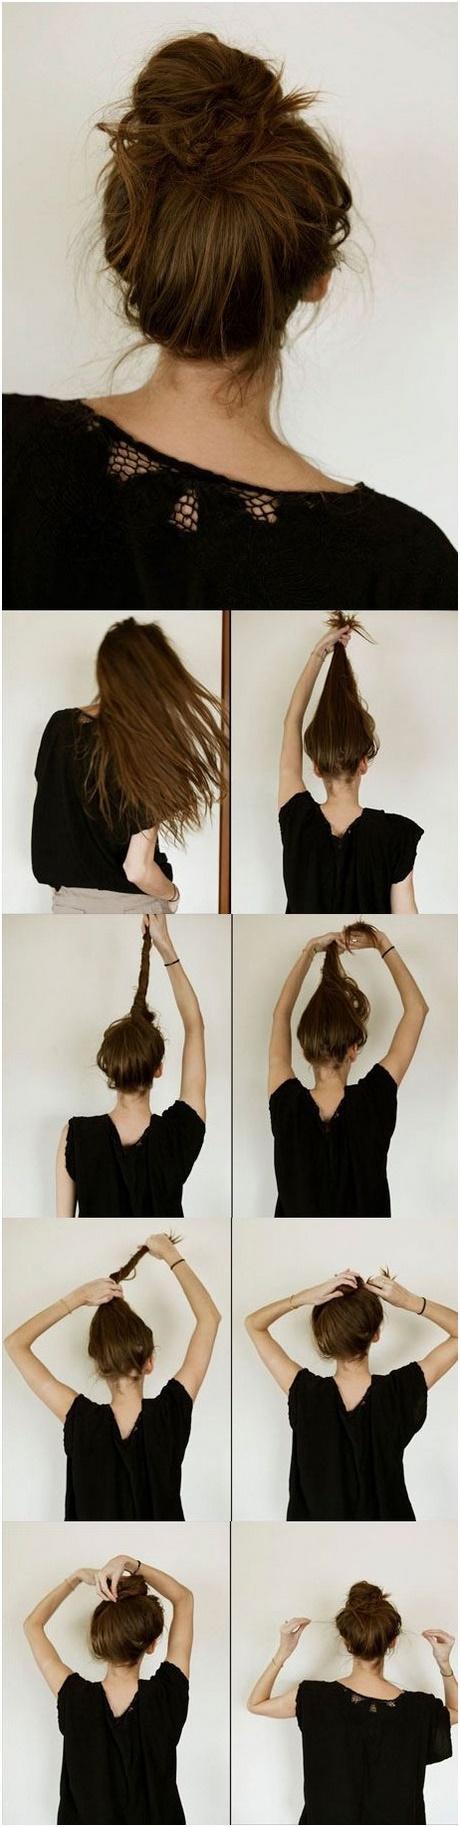 Easy casual updos for medium hair easy-casual-updos-for-medium-hair-99_11